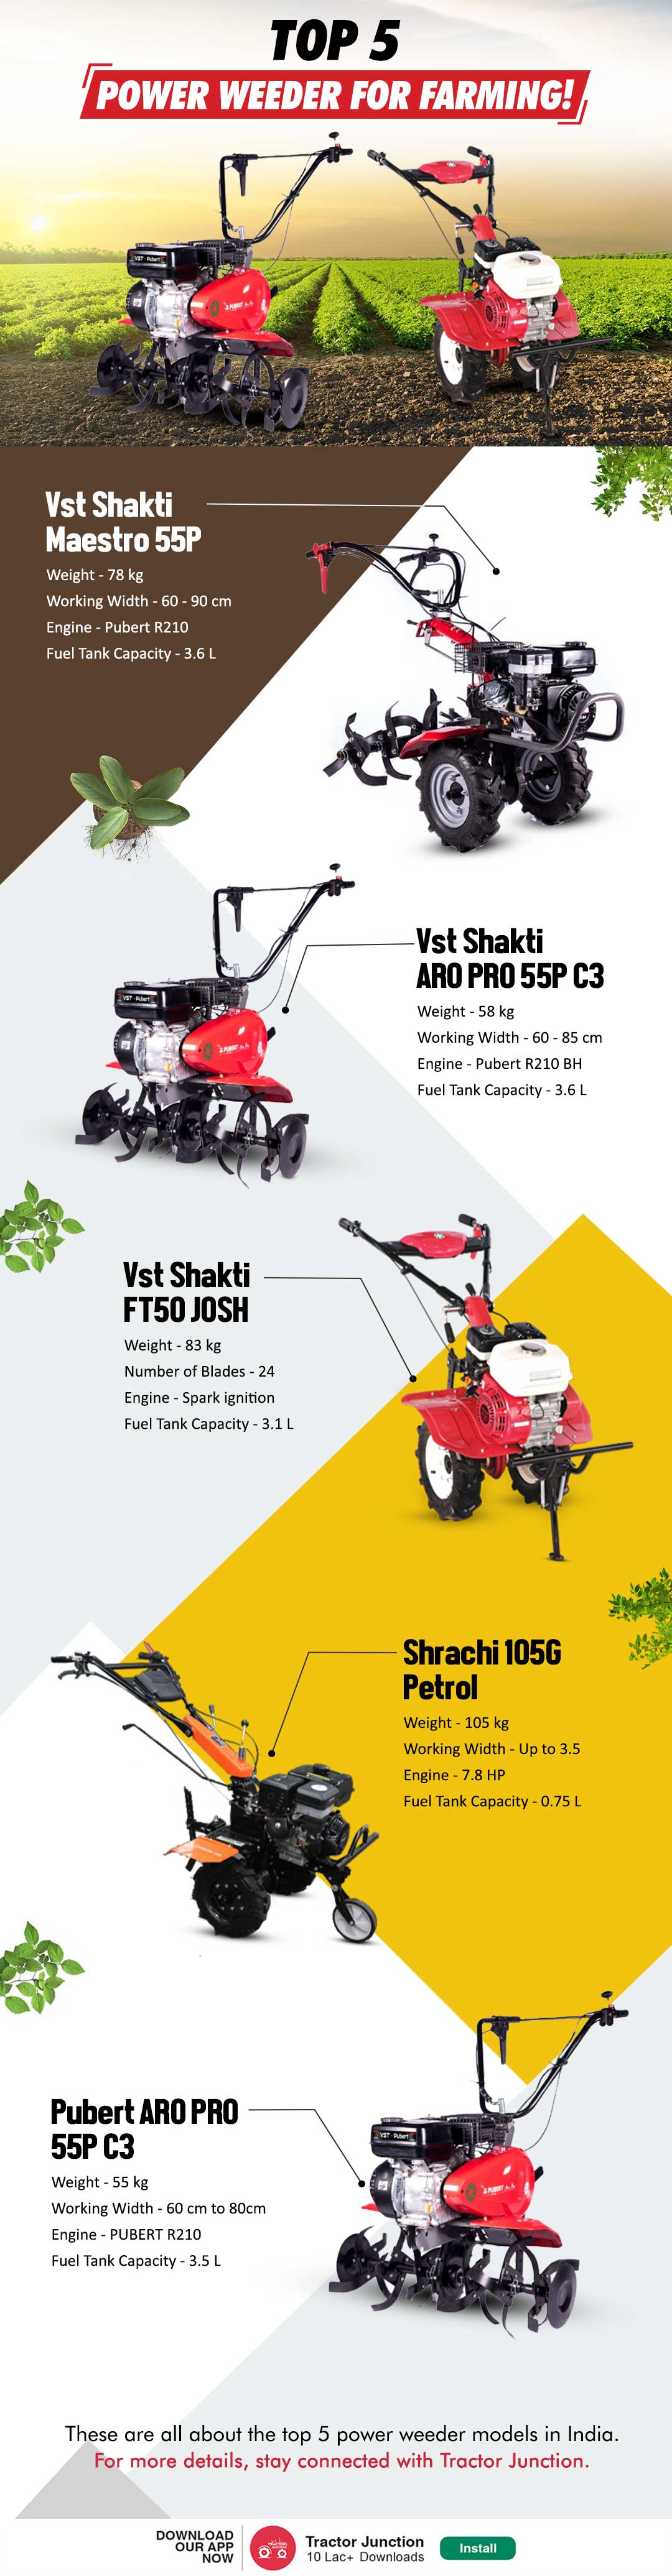 Top 5 Power Weeder Models in India -Infographic